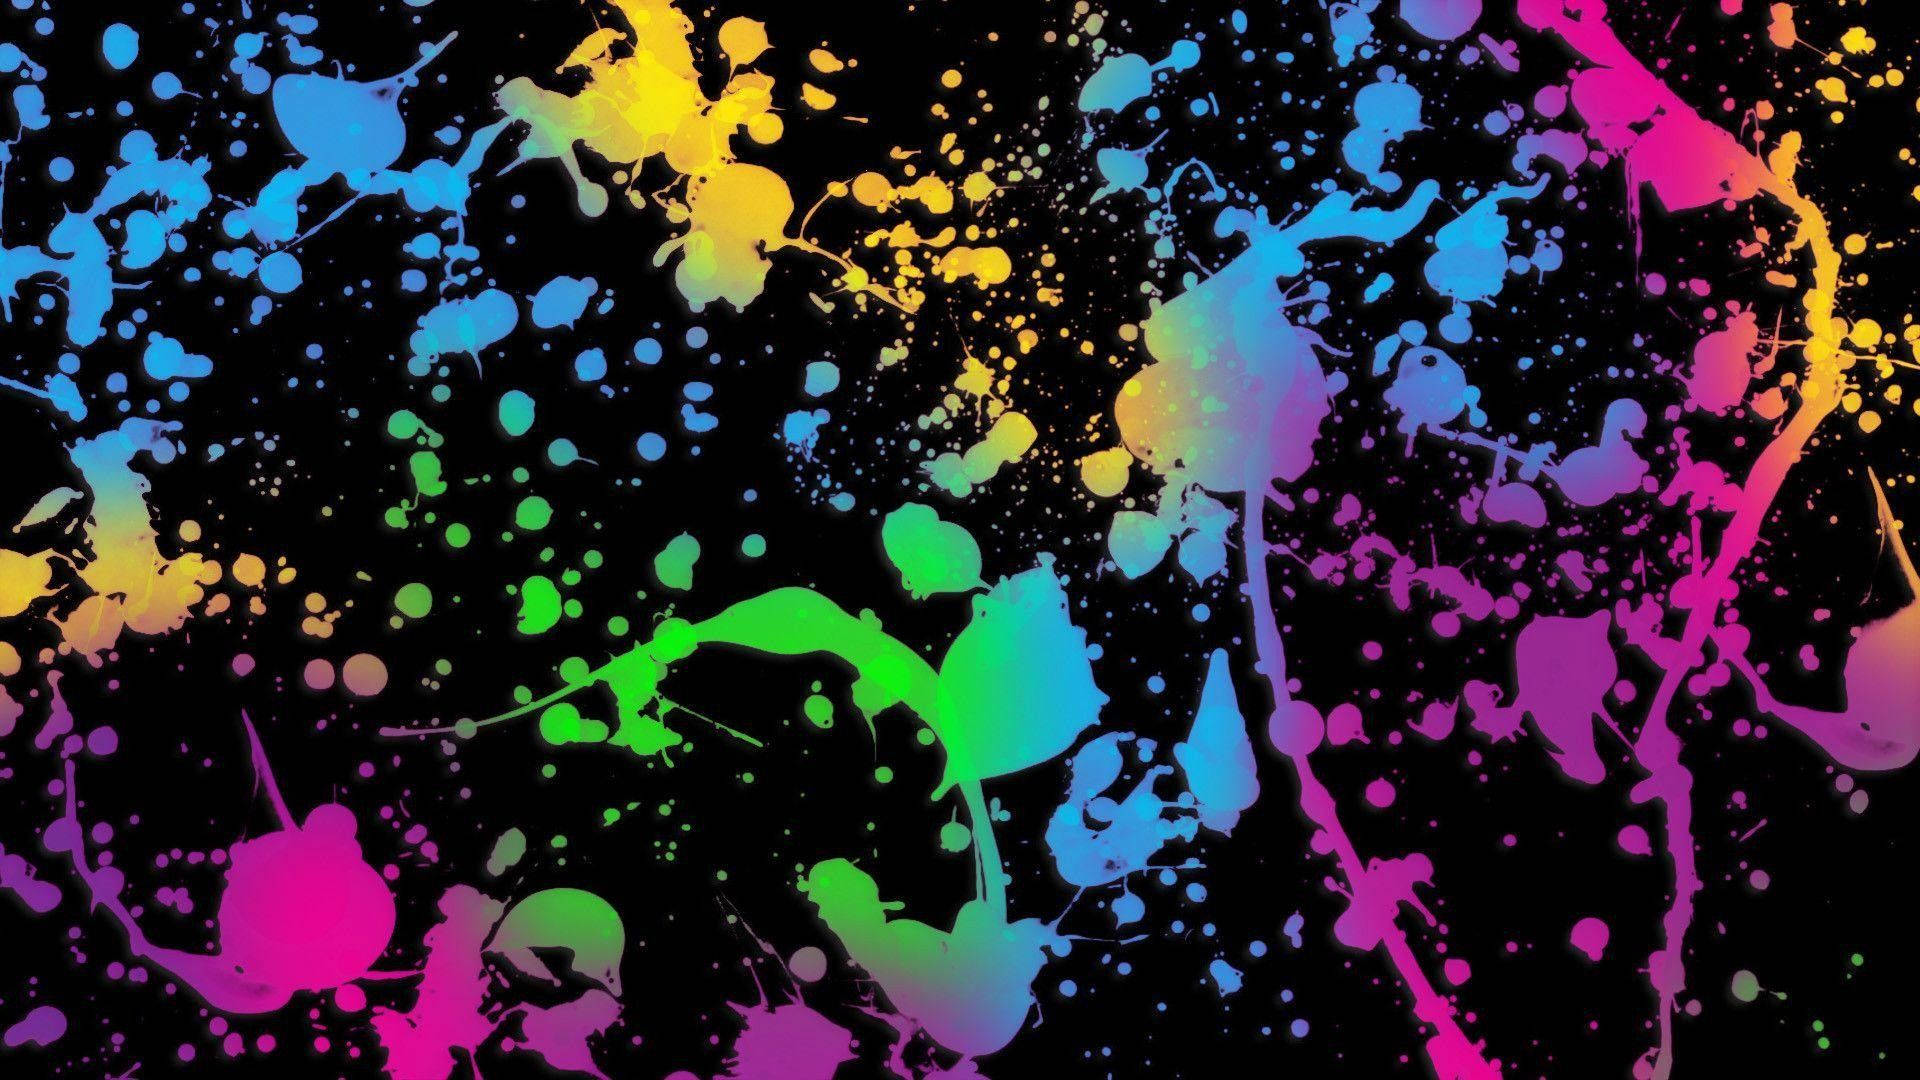 A Colorful Paint Splatter On A Black Background Wallpaper